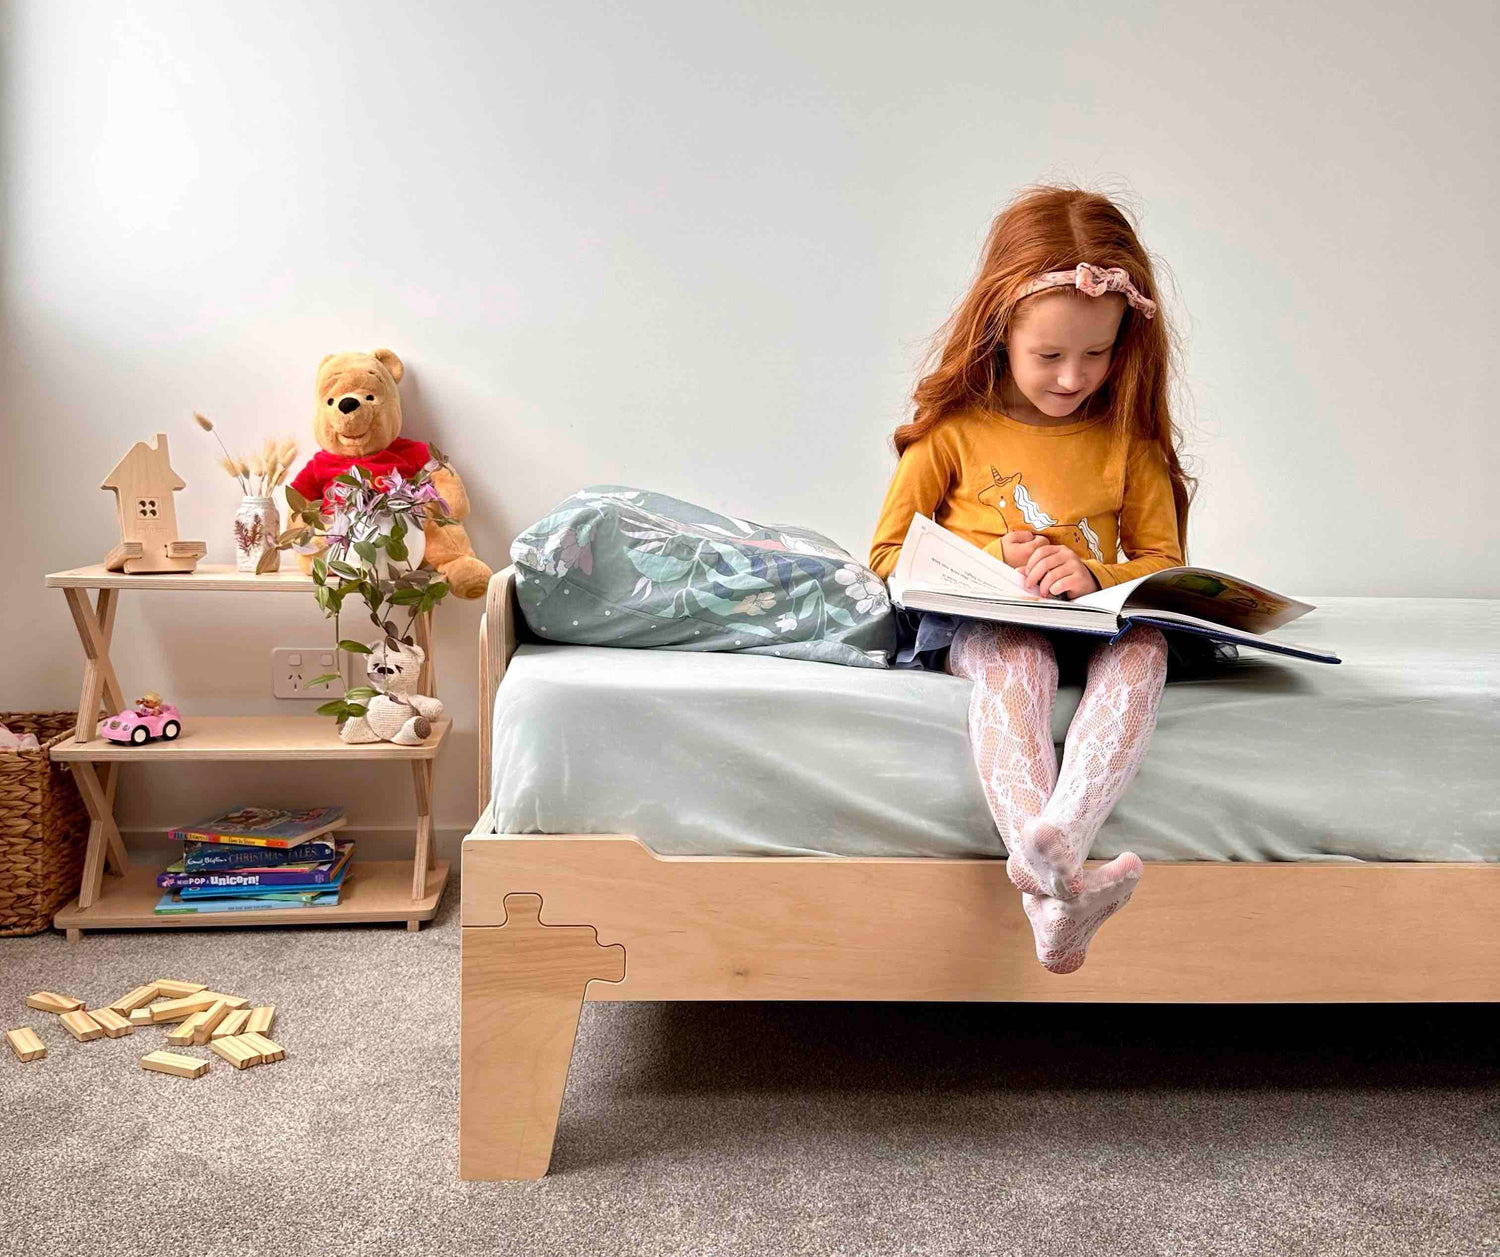 Discover high-quality kids' beds at our store - floor, bunk, loft, storage beds and more. Perfect for fostering Montessori independence.